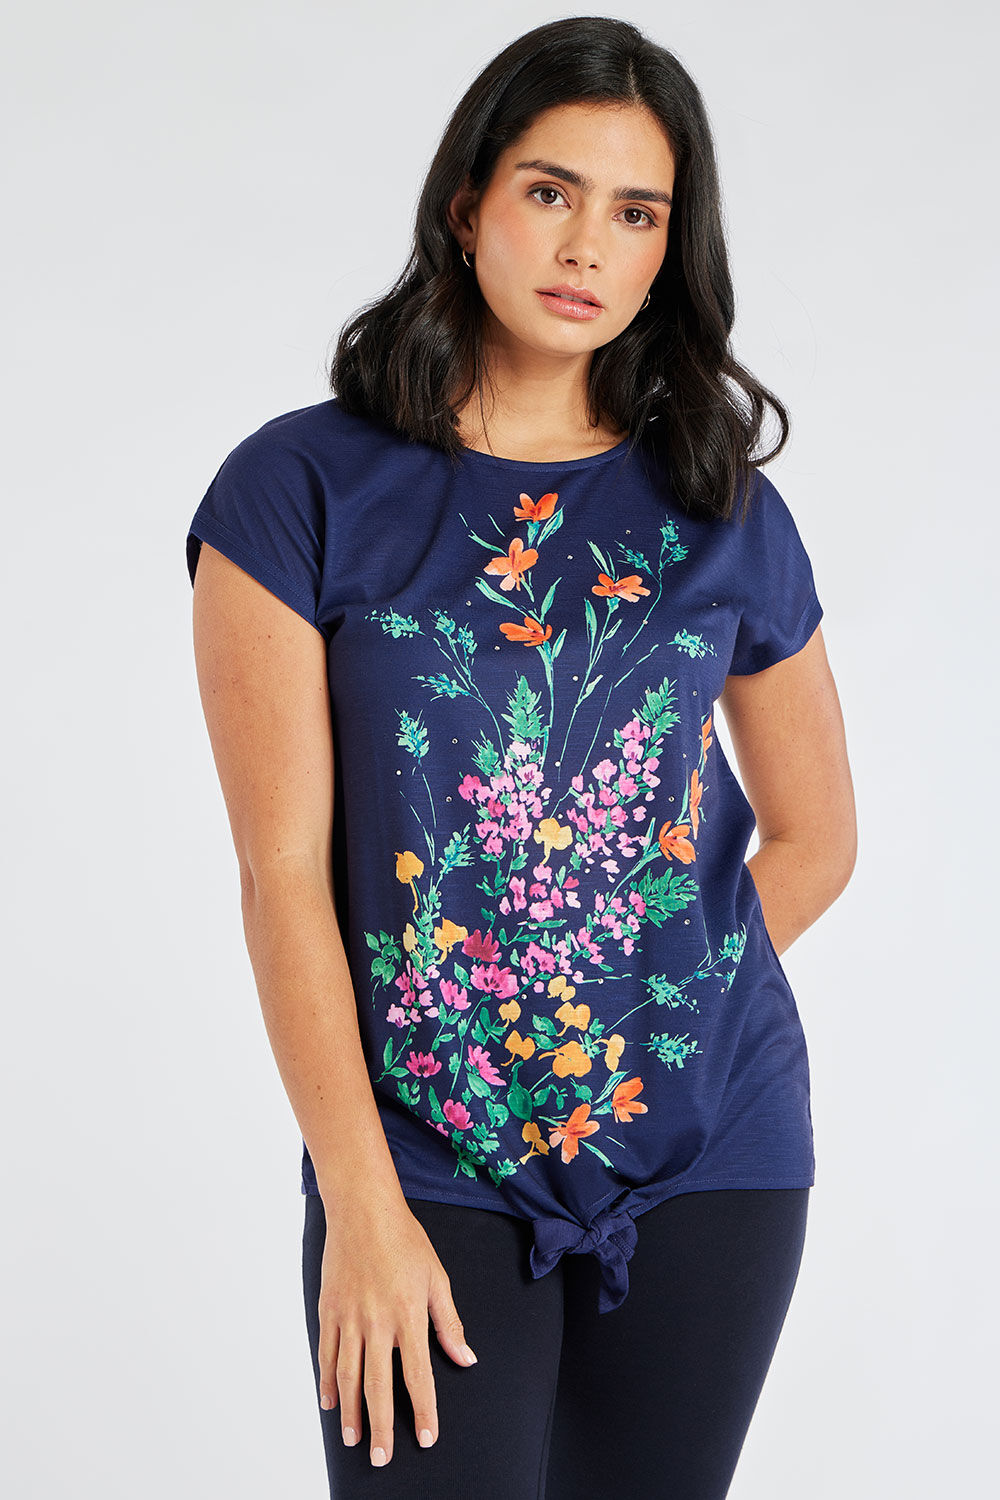 Bonmarche Navy Short Sleeve Sprig Floral Print T-Shirt With Tie Front, Size: 26